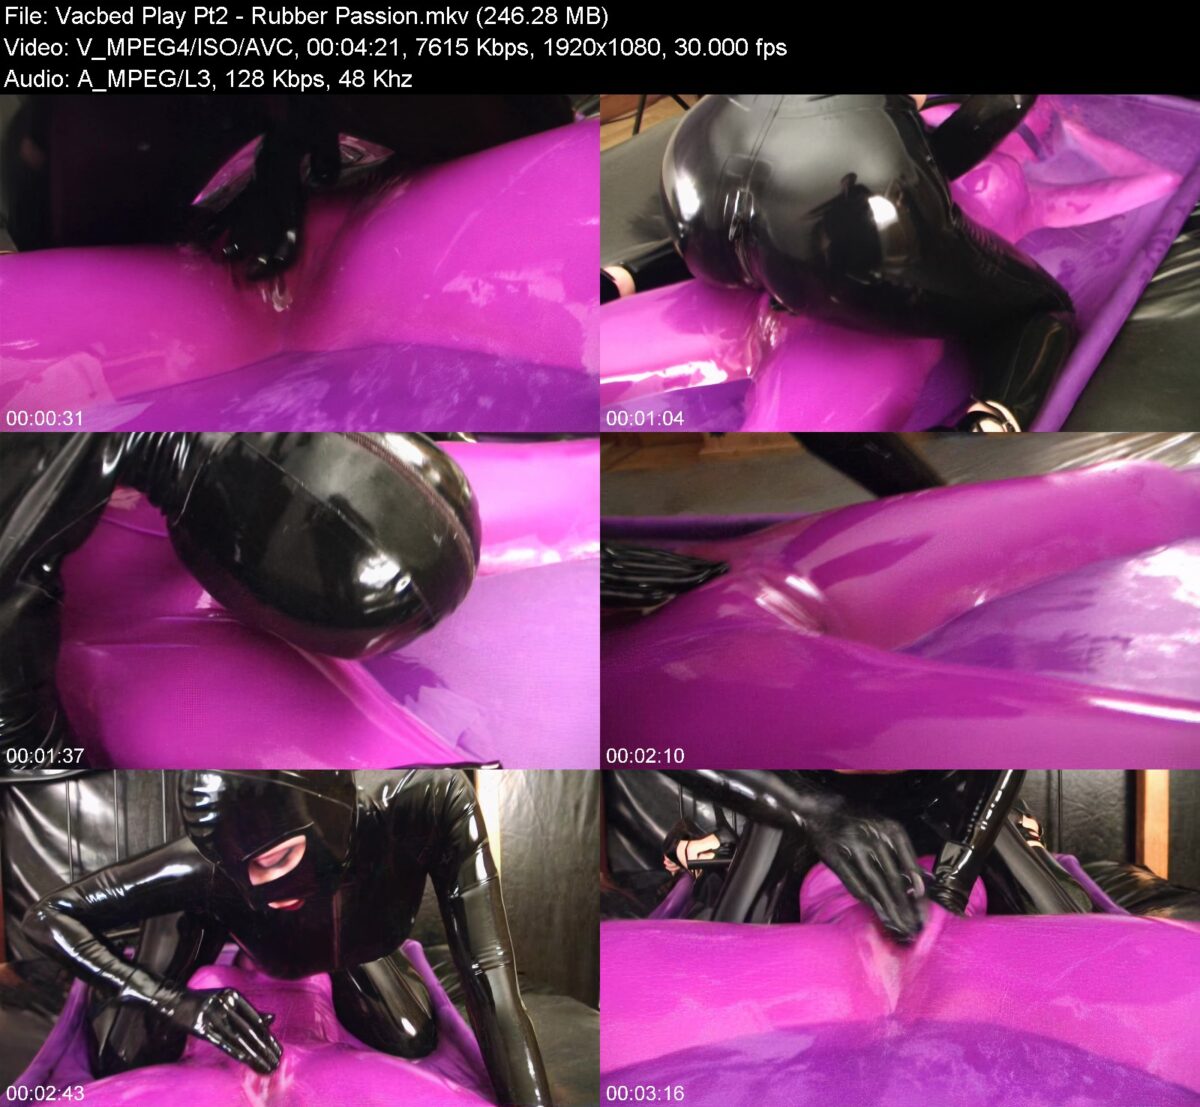 Actress: Vacbed Play Pt2. Title and Studio: Rubber Passion